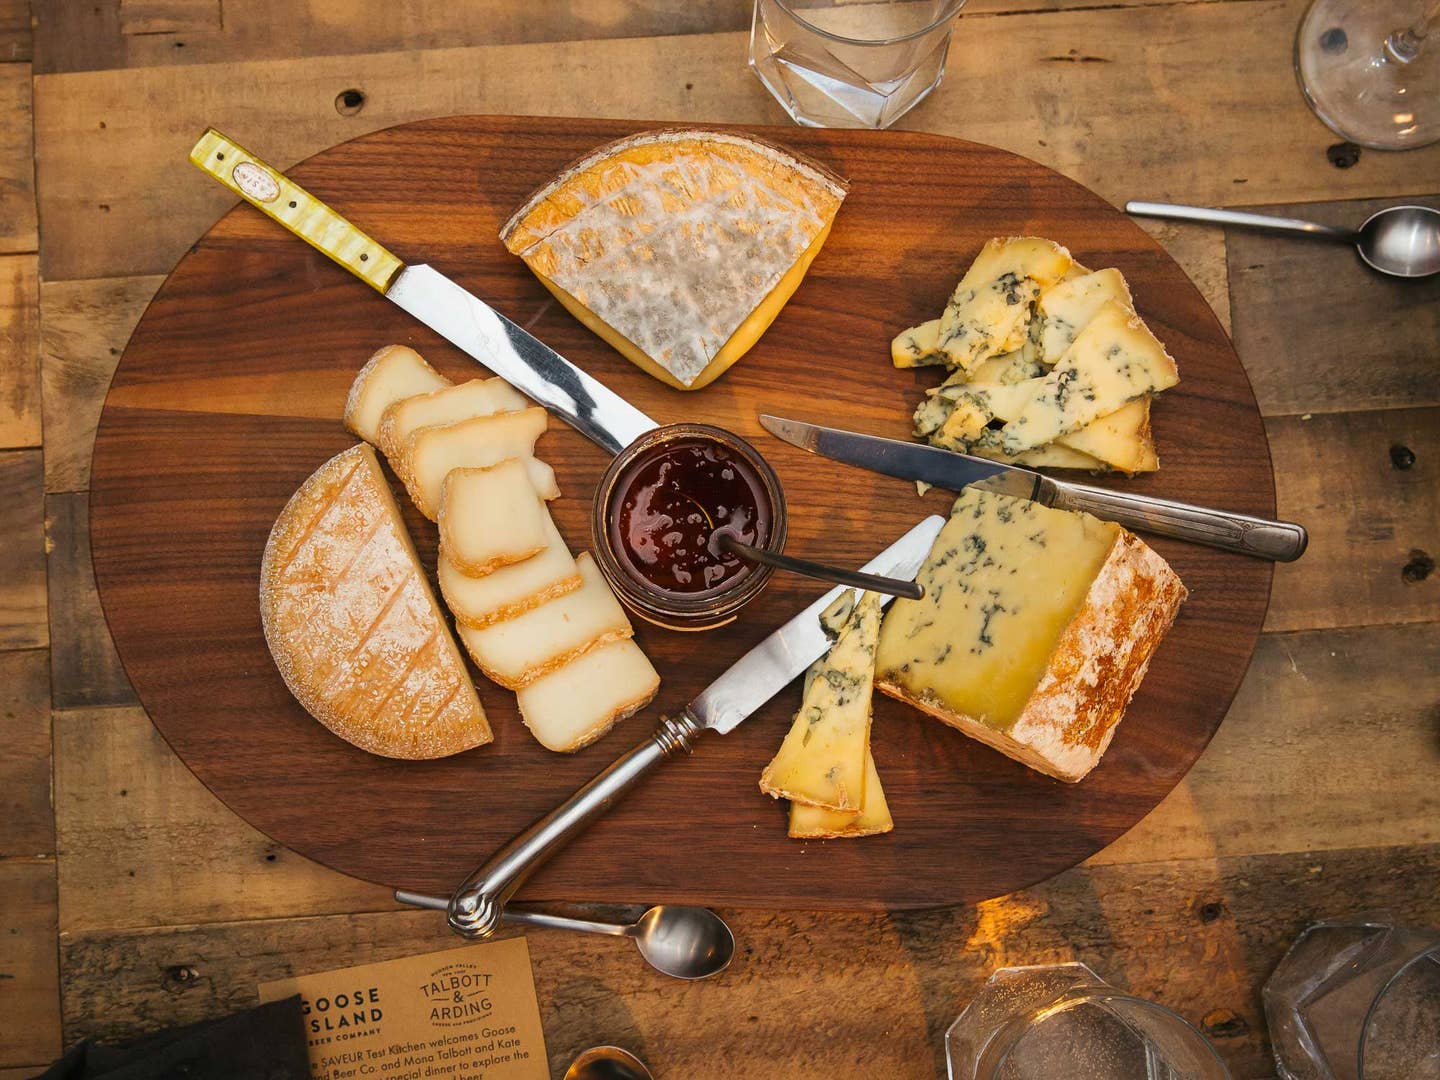 Goose Island Beer and Cheese Pair Up in the Saveur Test Kitchen